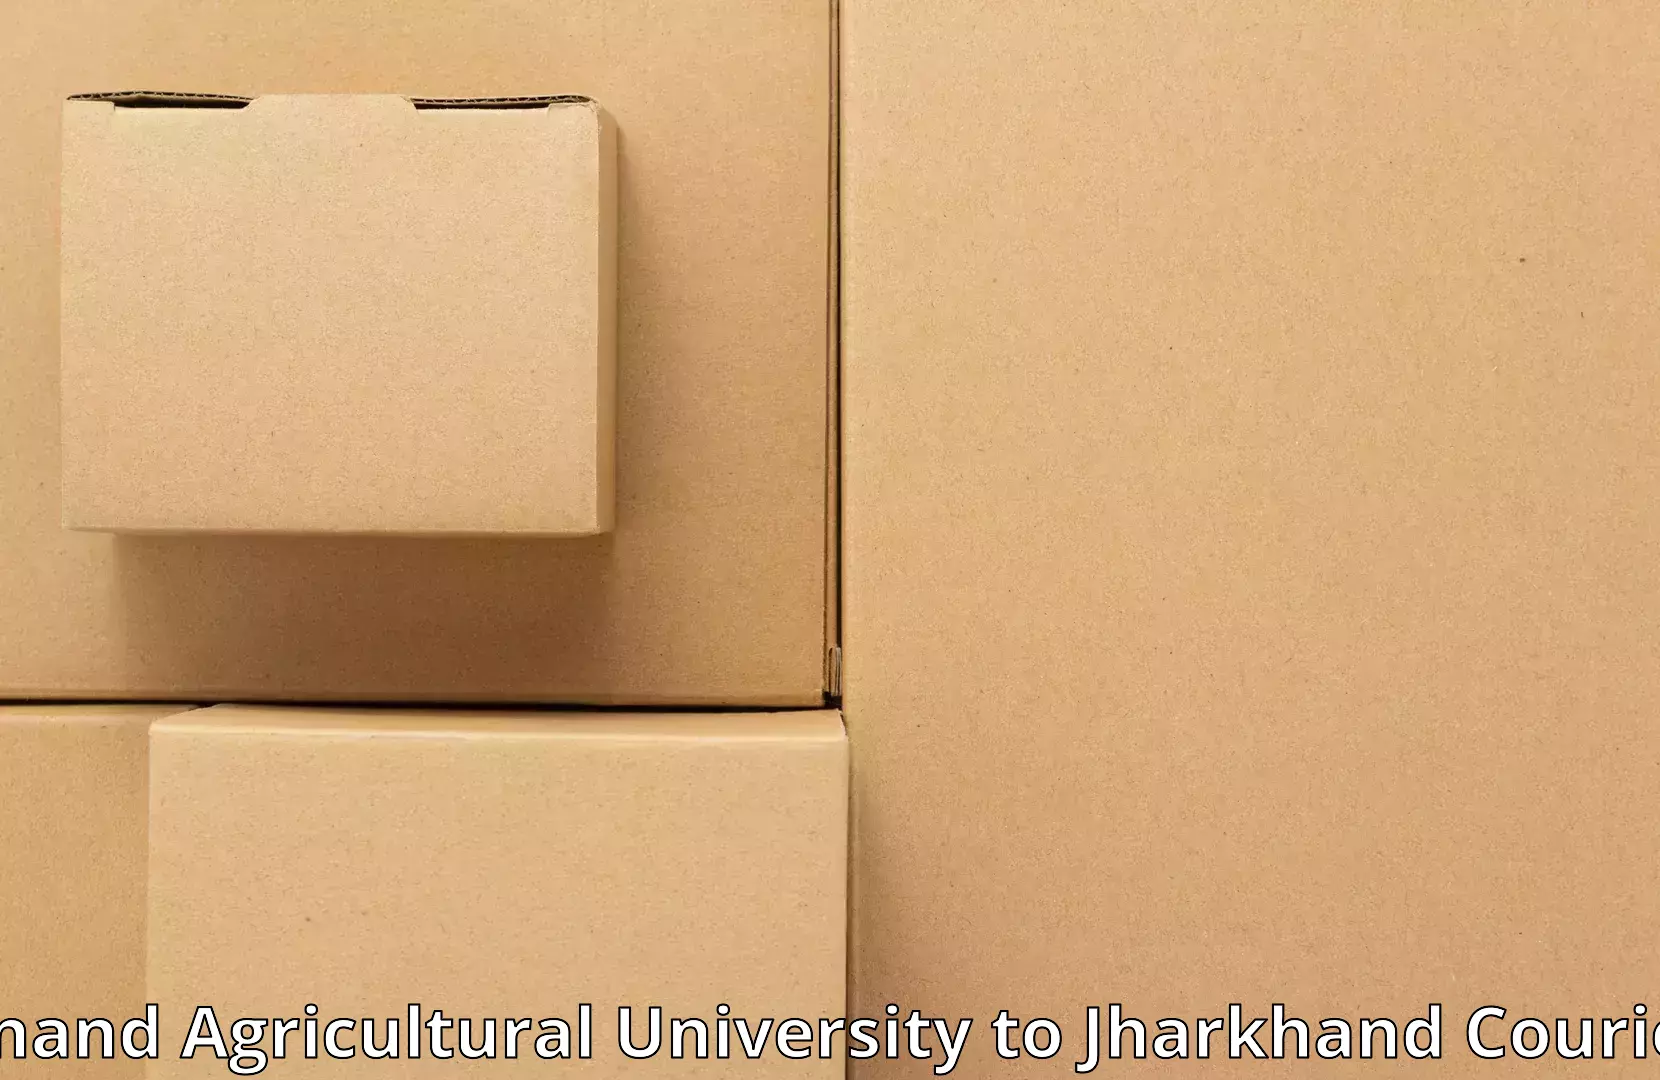 Trusted household movers Anand Agricultural University to IIT Dhanbad